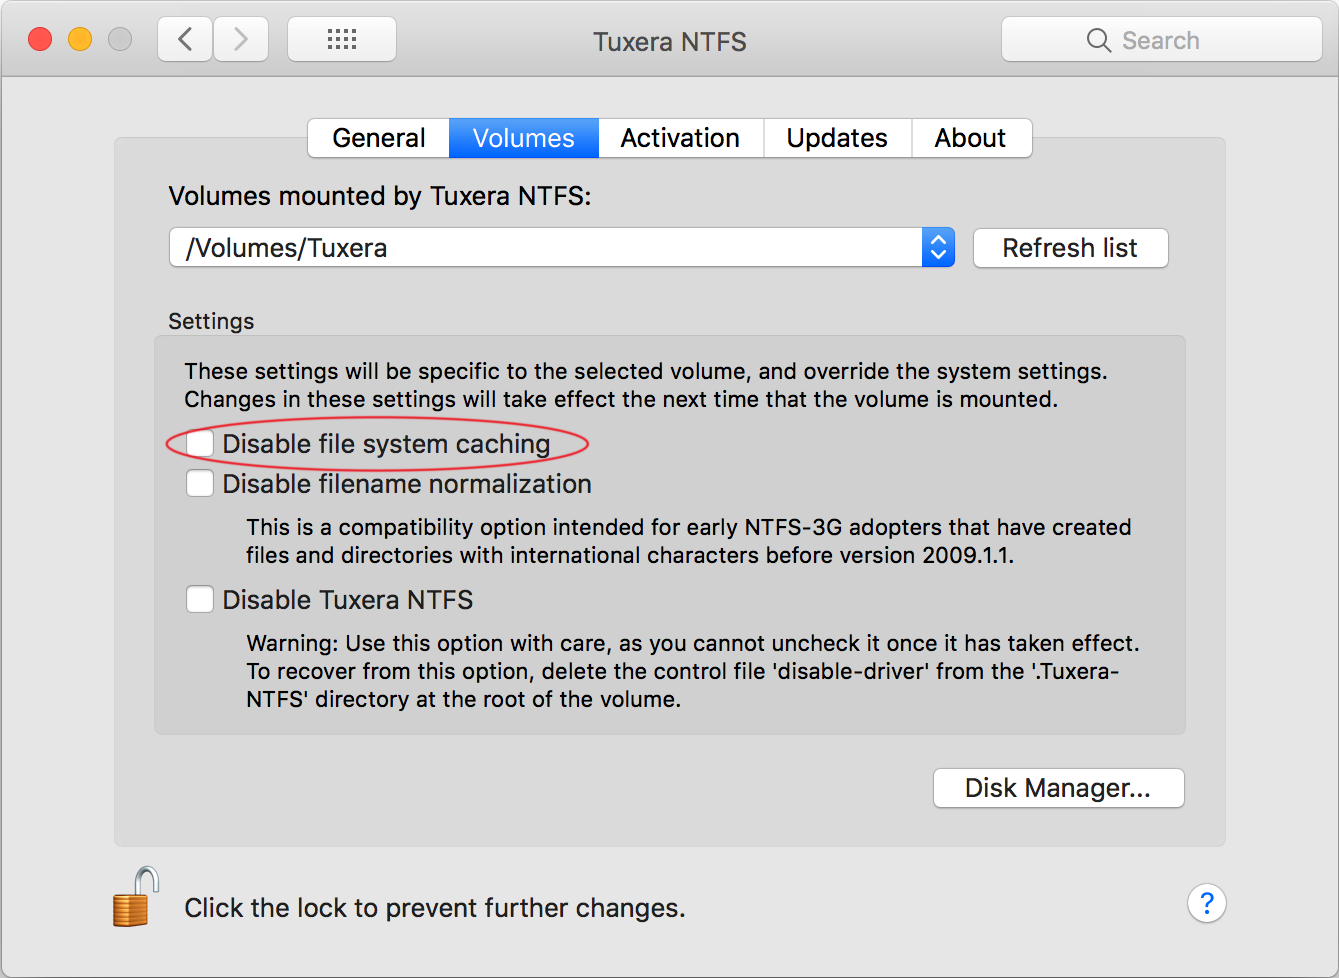 ntfs for mac not going from settings even after uninstall